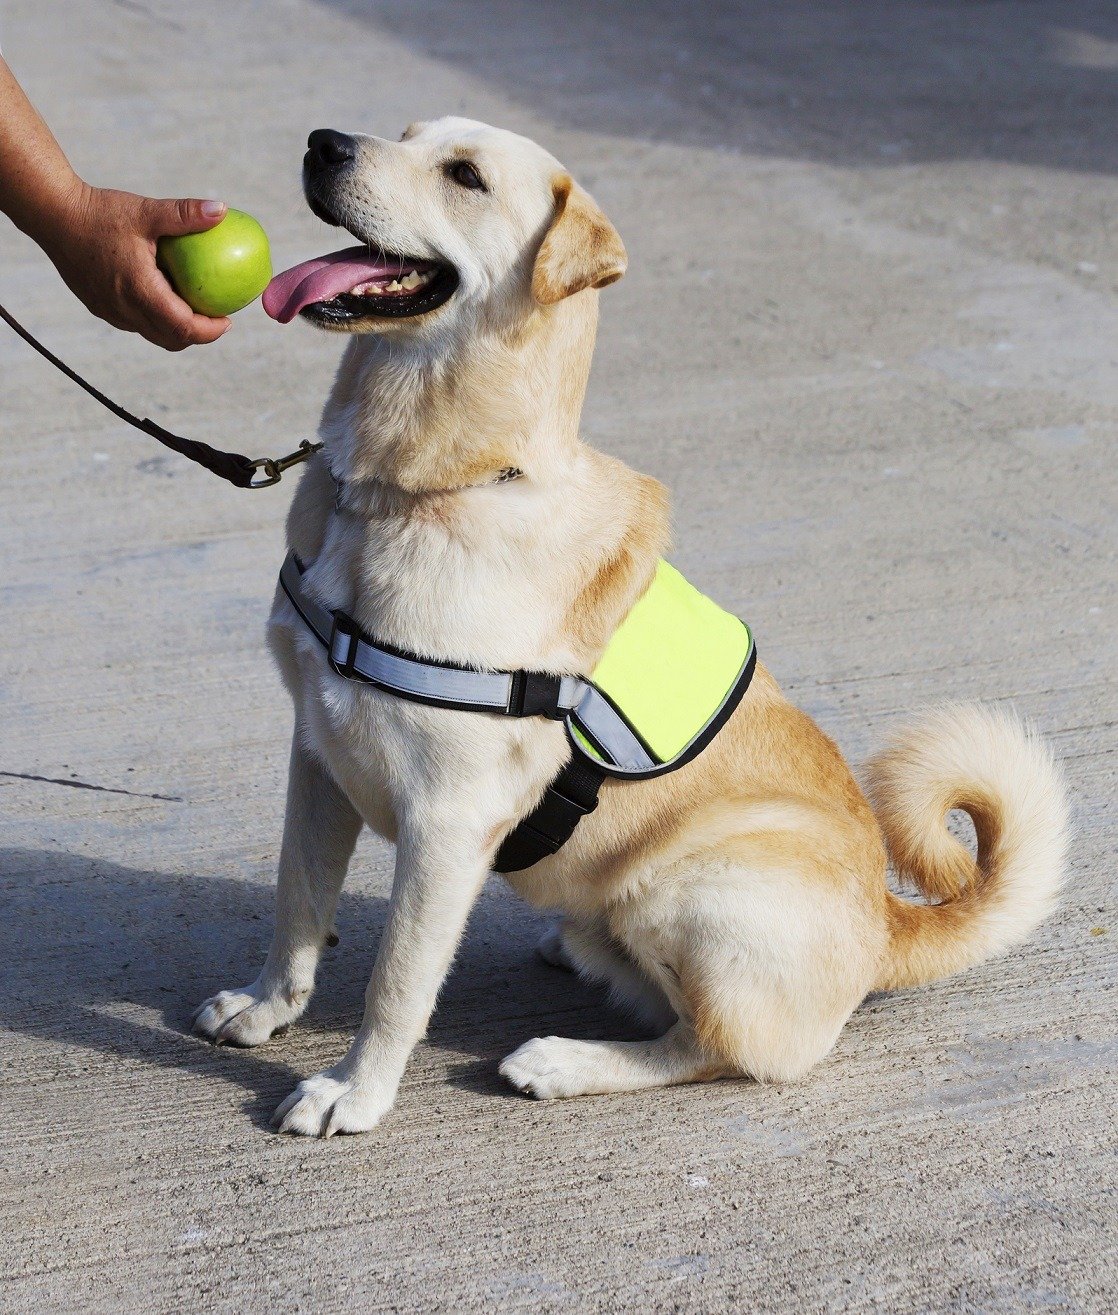 This Is the No. 1 Most Important Job of a Service Dog